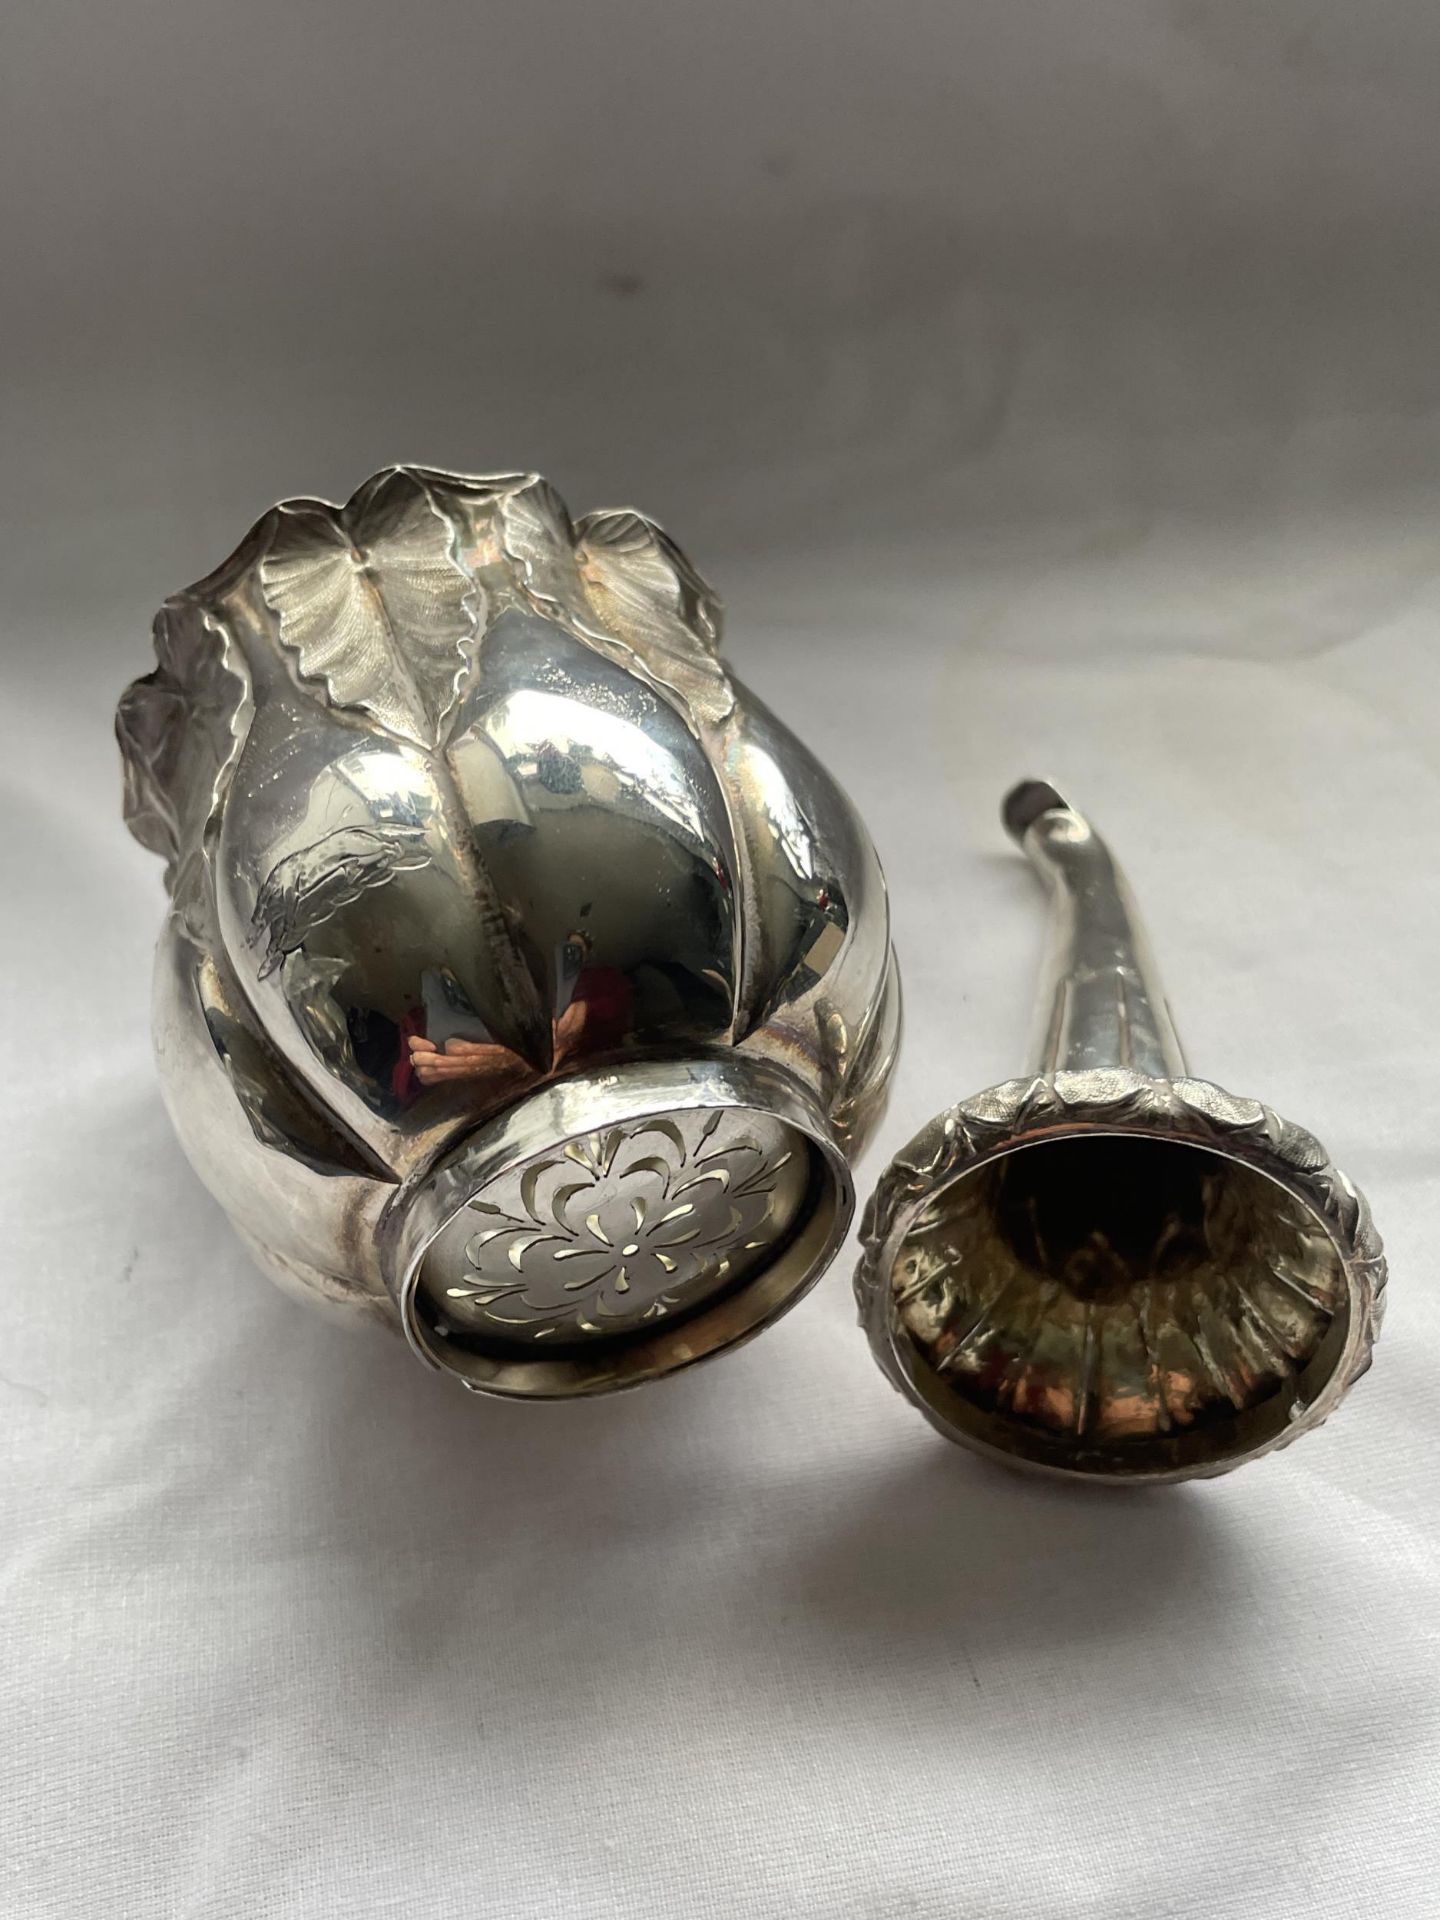 A GEORGIAN HALLMARKED SILVER TWO PIECE ROSE DESIGN FUNNEL, MARKS INDISTINCT, WEIGHT 131 GRAMS - Image 12 of 18